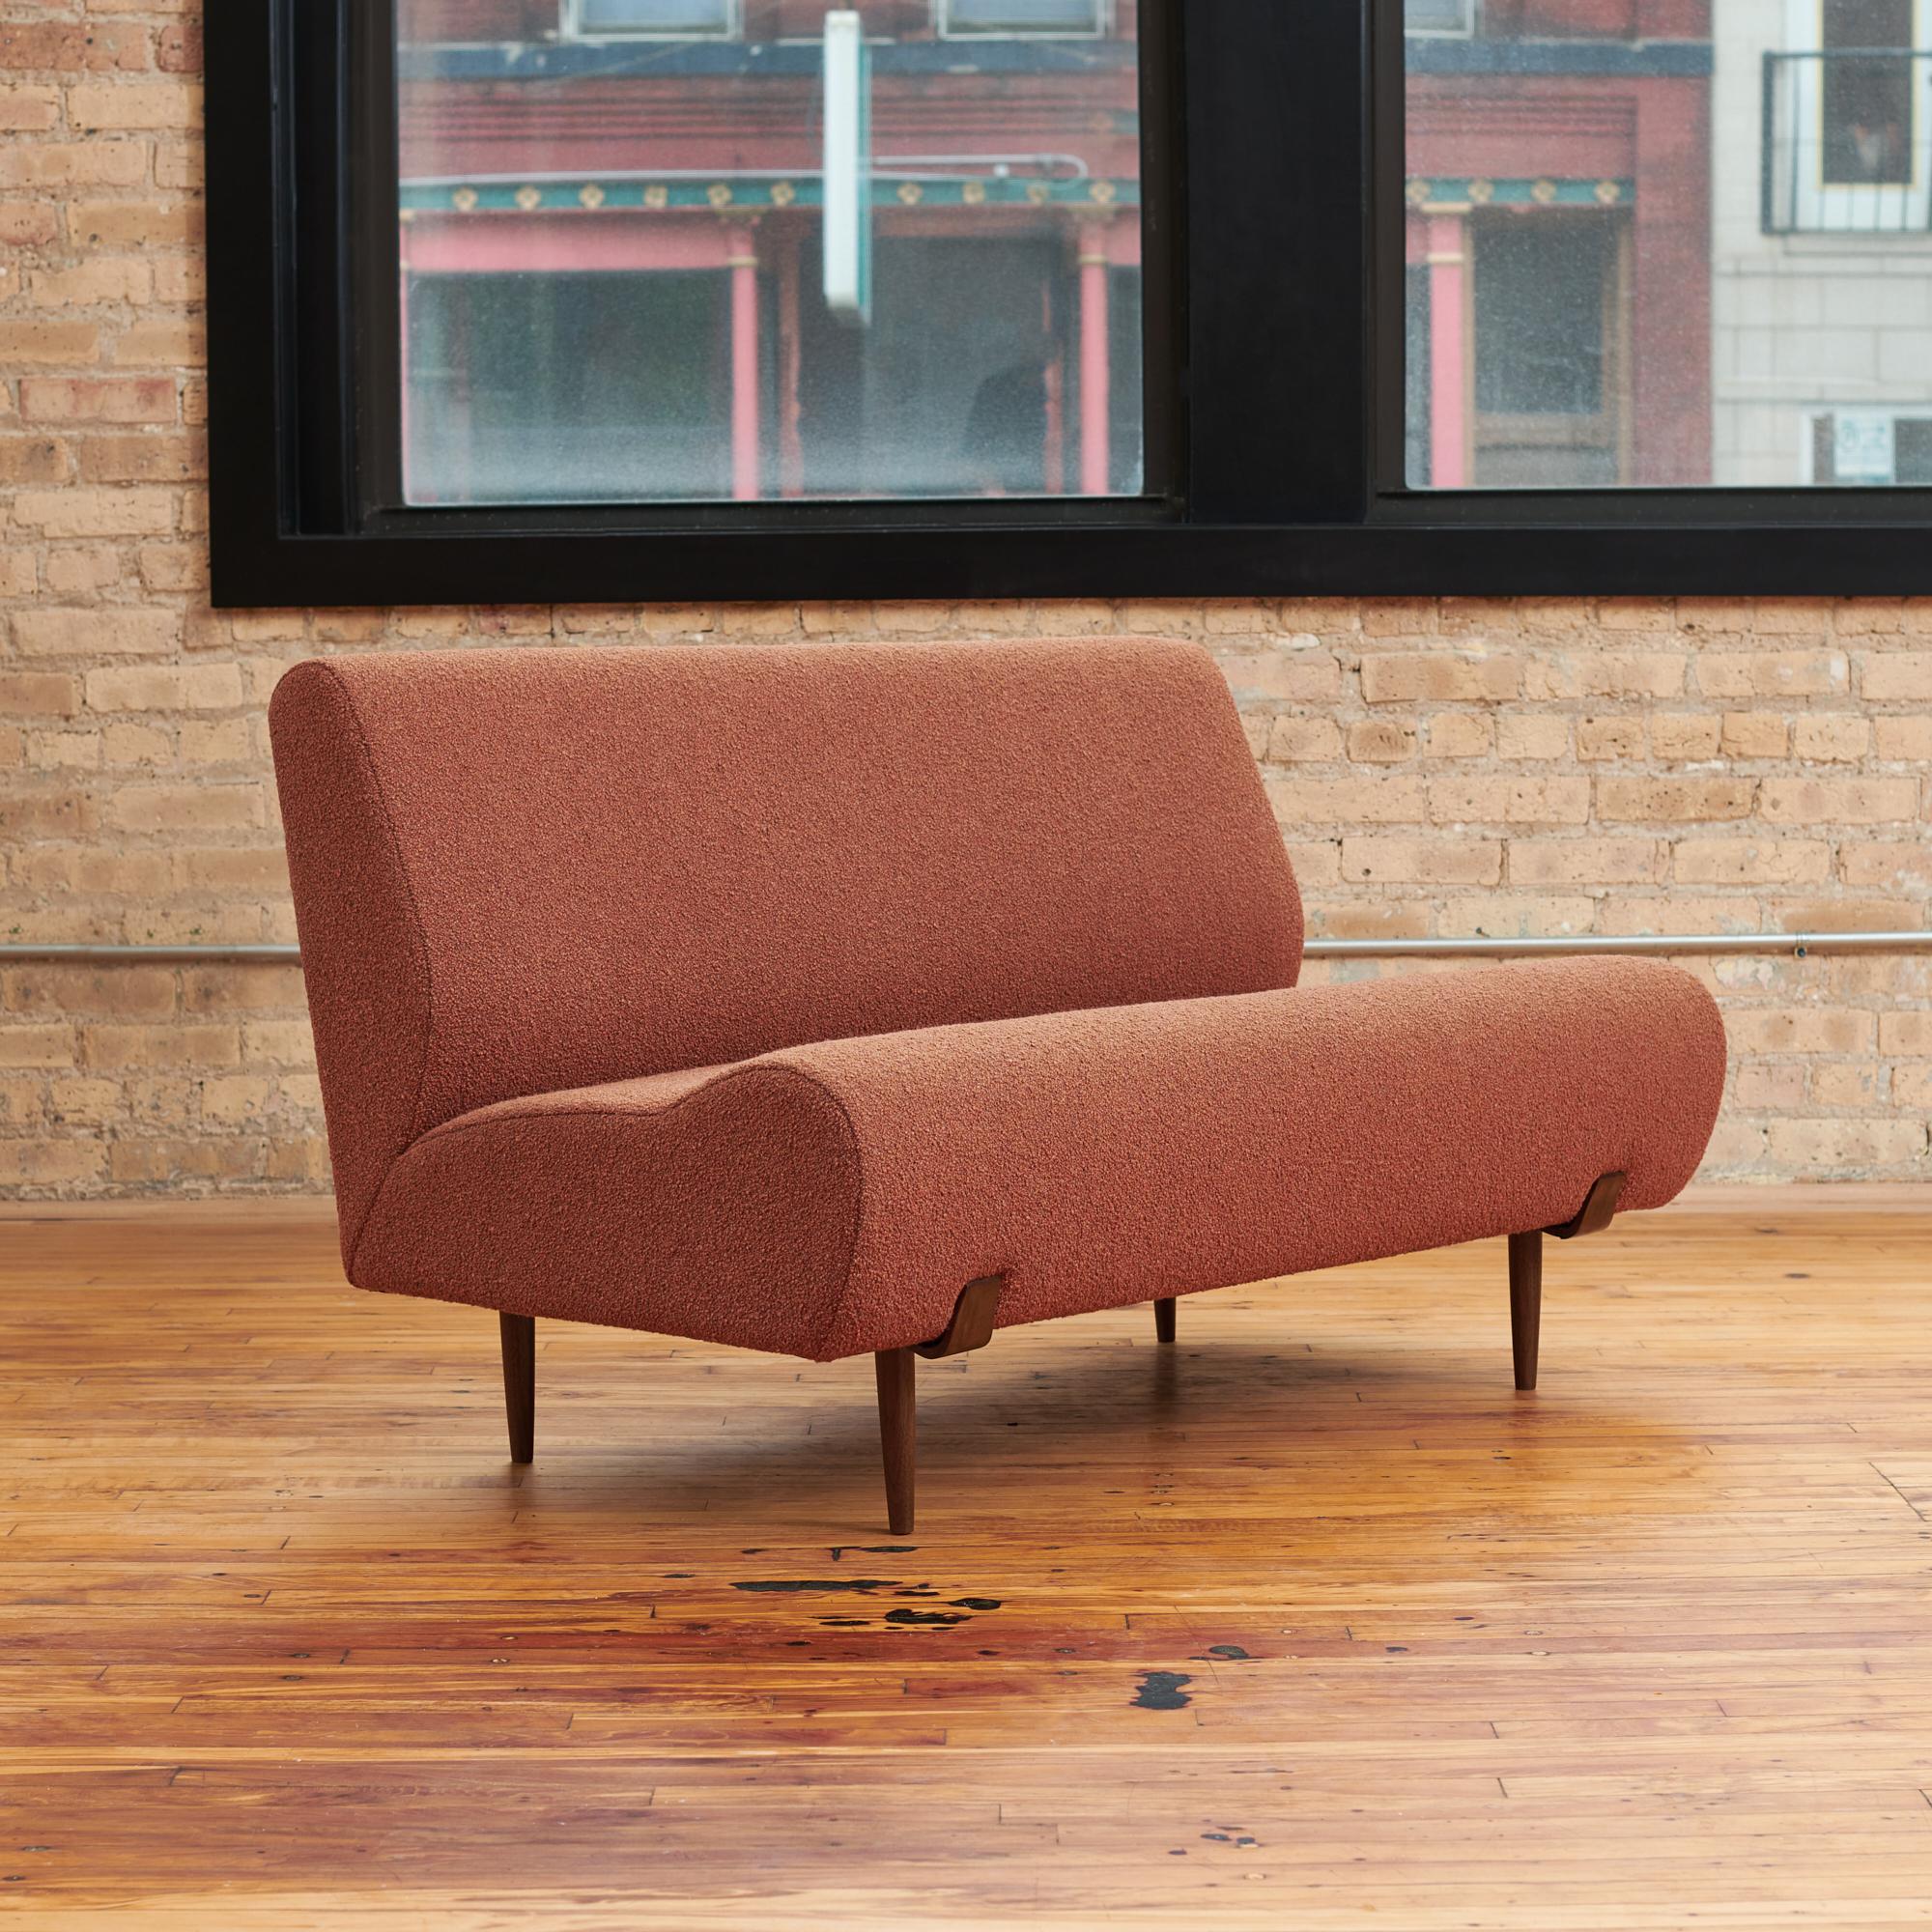 Italian Midcentury Two Piece Sofa in Sienna Orange Bouclé with Walnut Legs In Good Condition For Sale In Chicago, IL